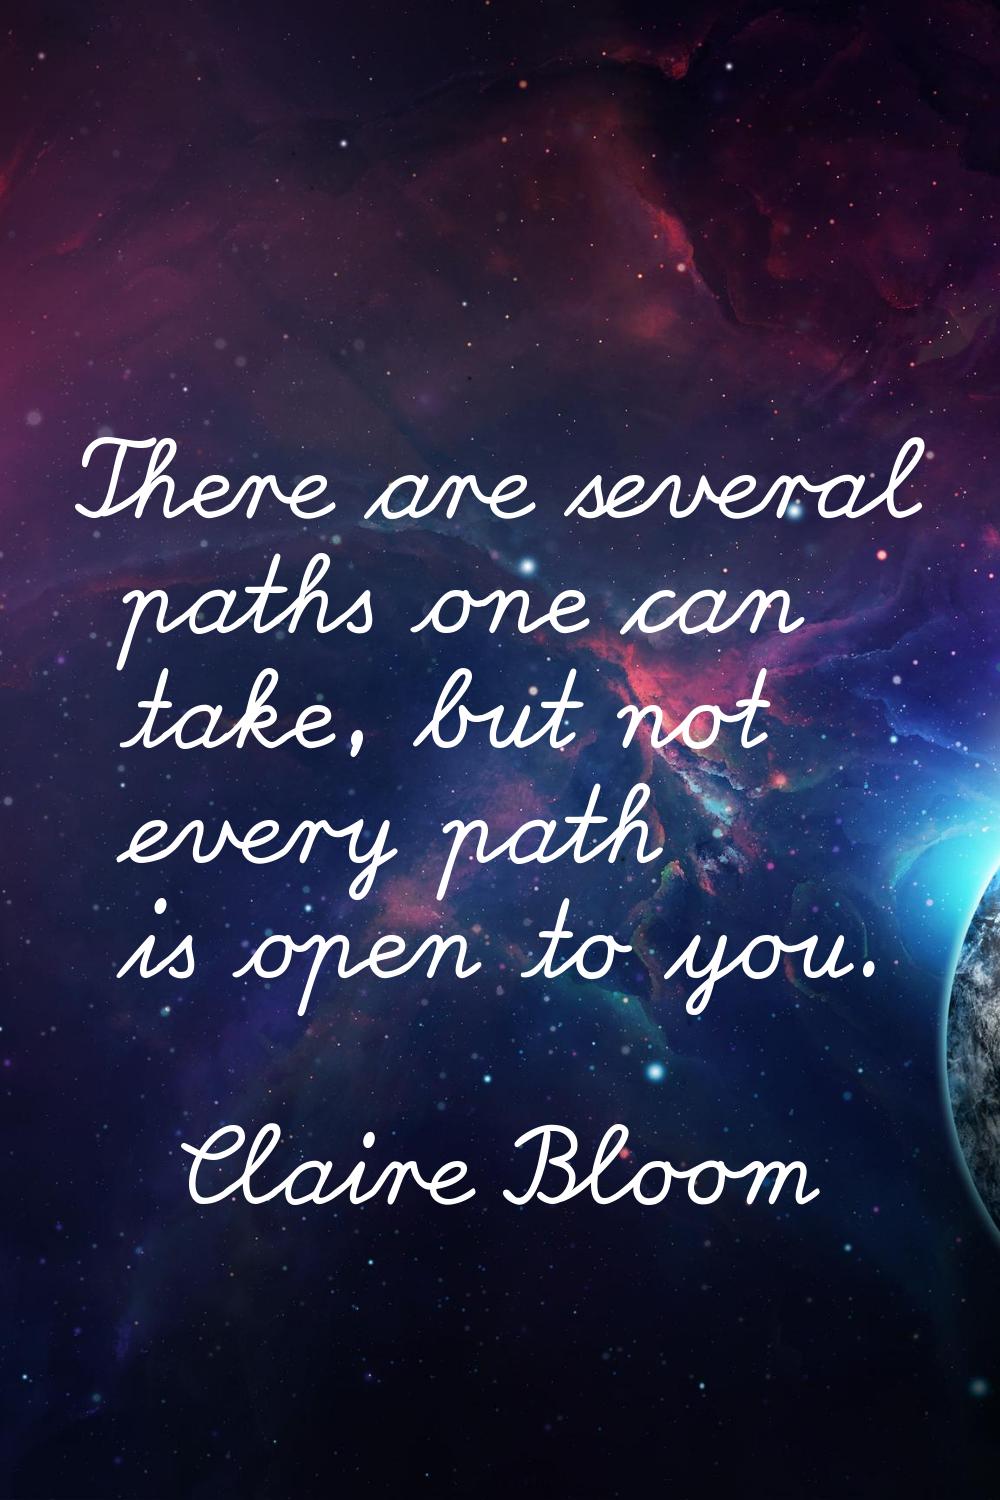 There are several paths one can take, but not every path is open to you.